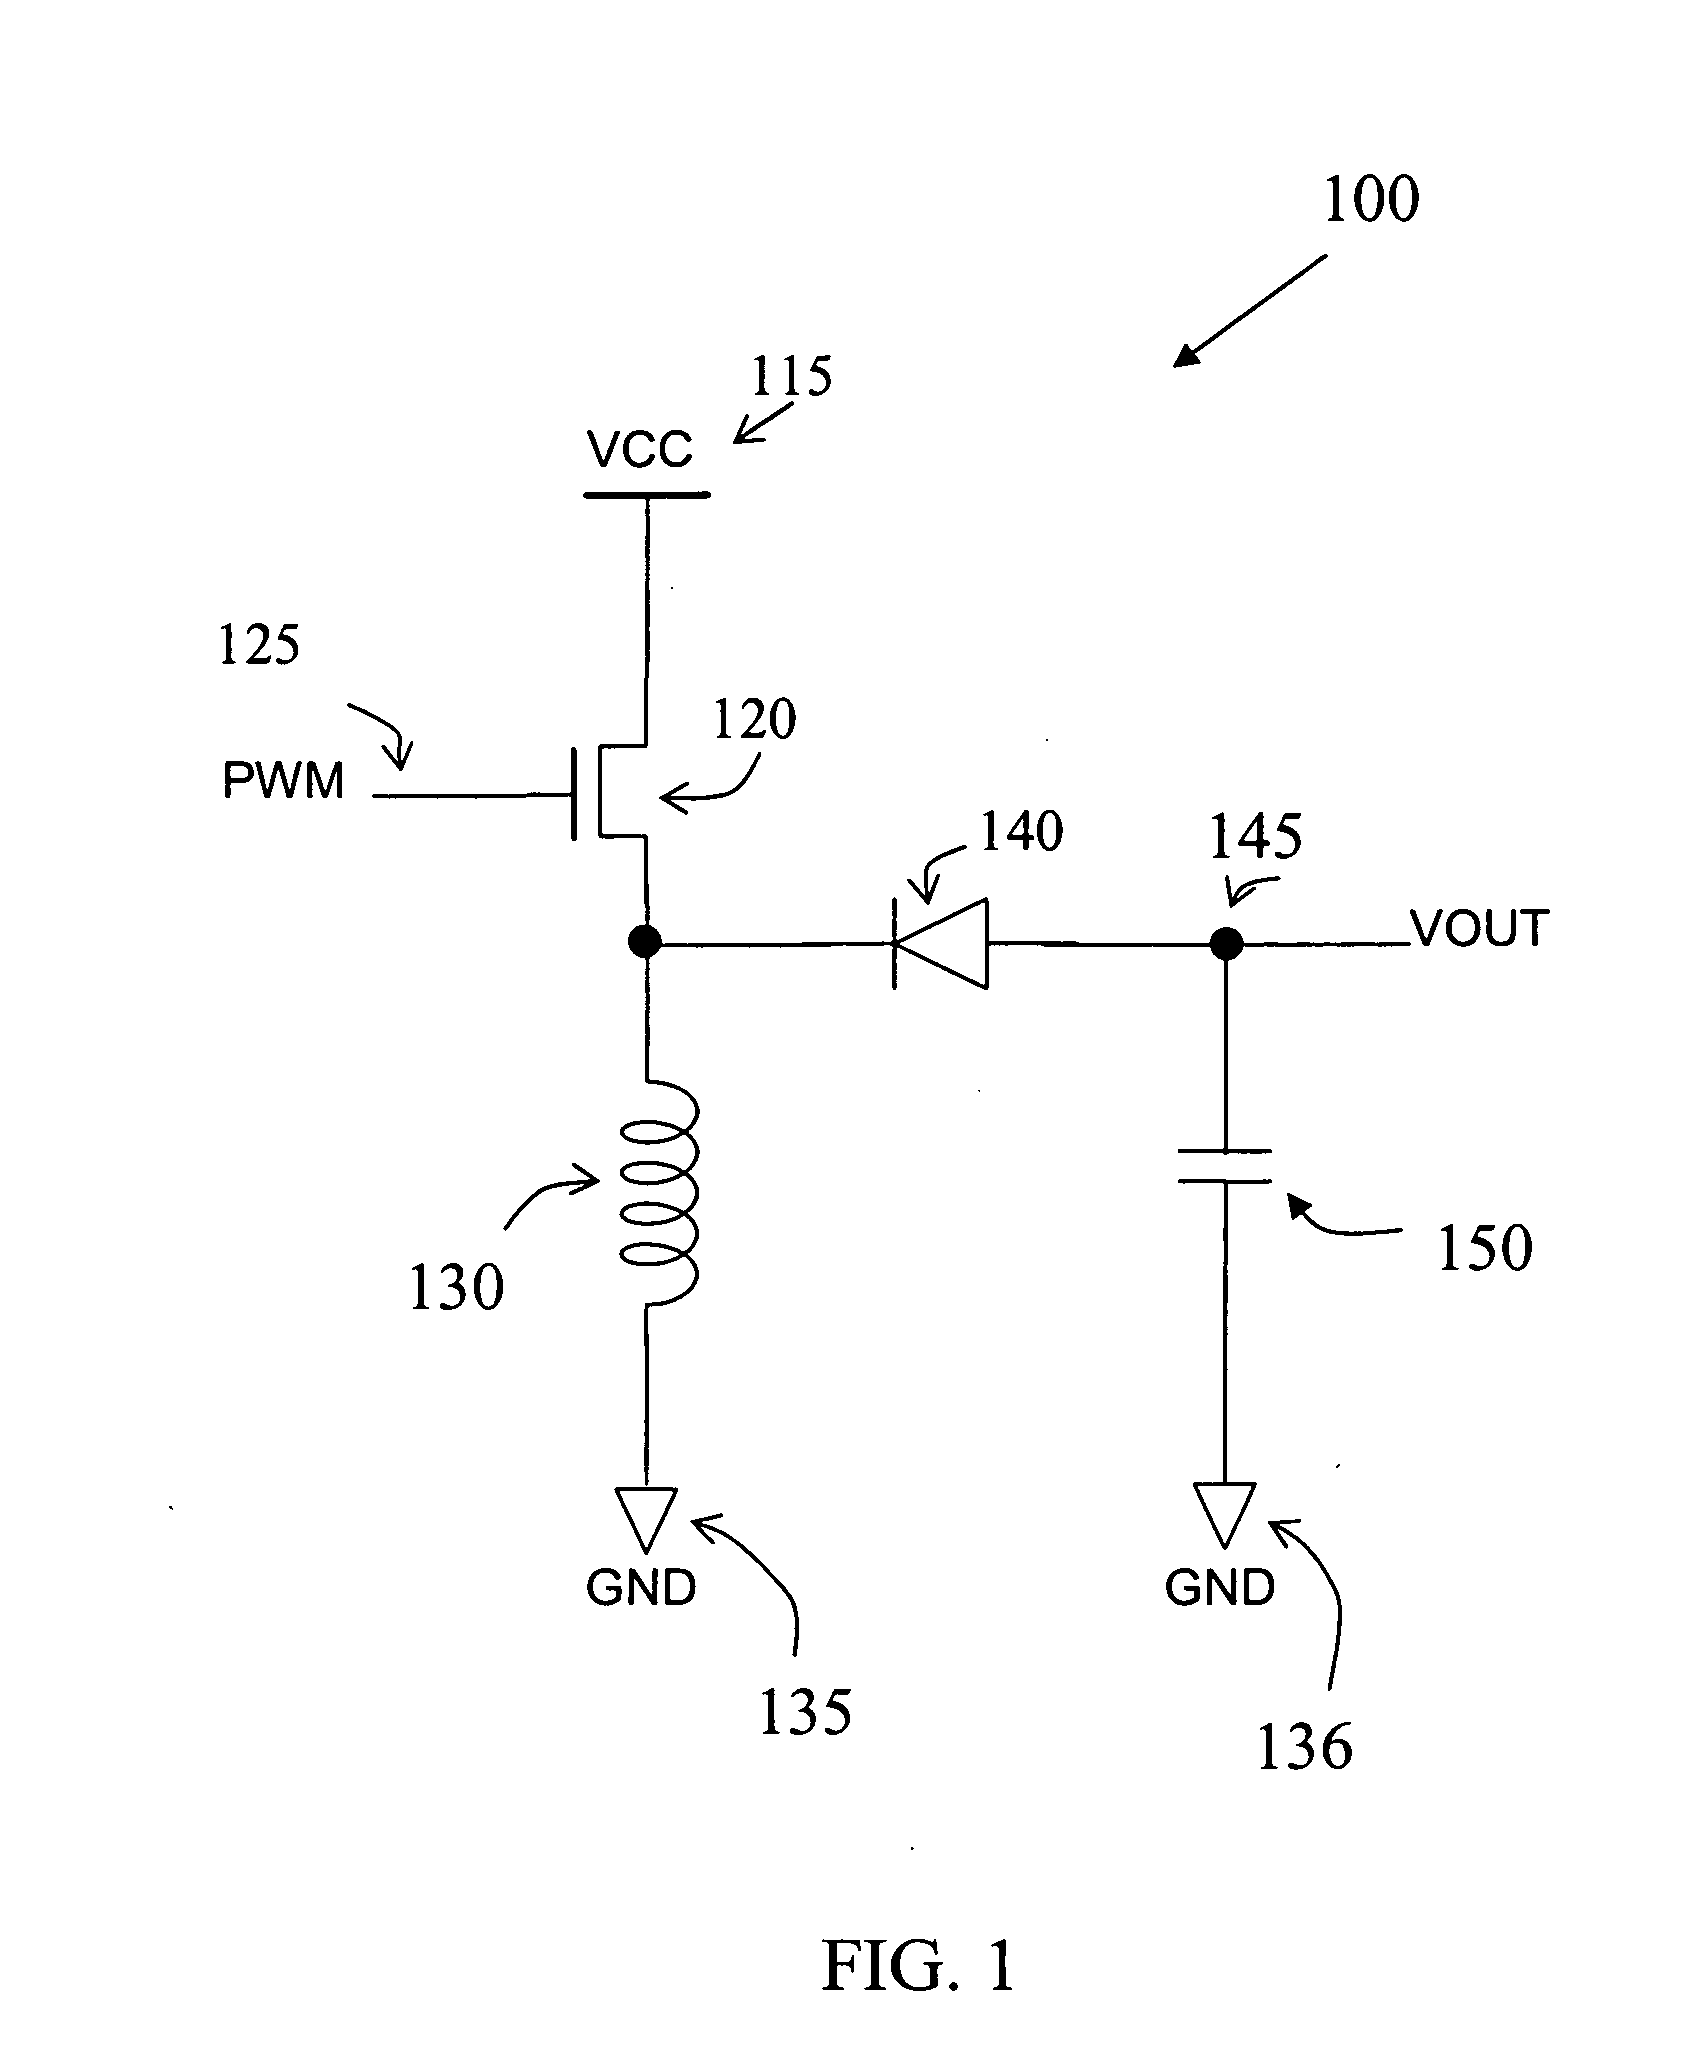 Method and apparatus for a pulse width modulated DC-DC converter